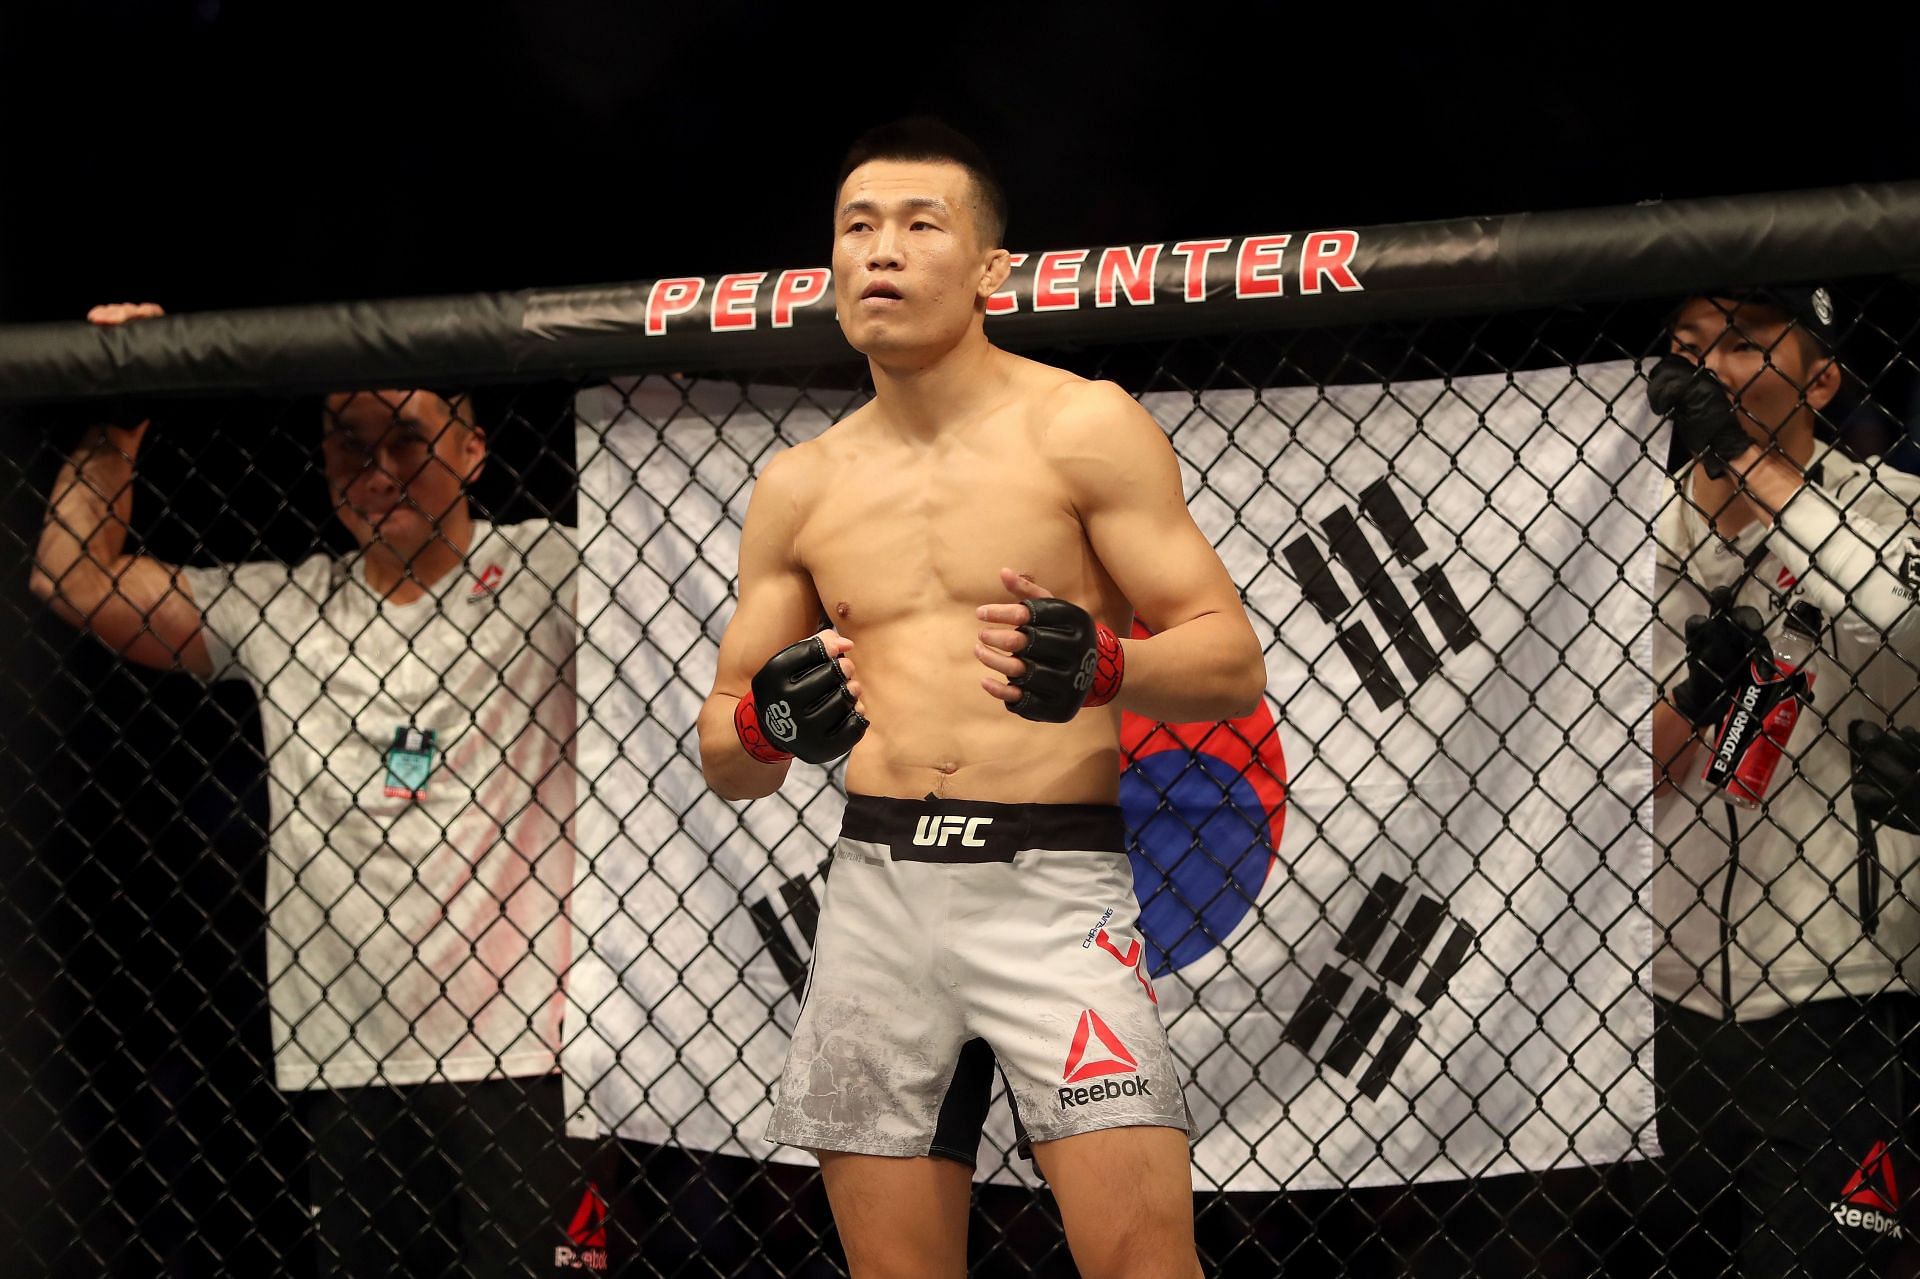 Chan Sung Jung holds a record of 17-6